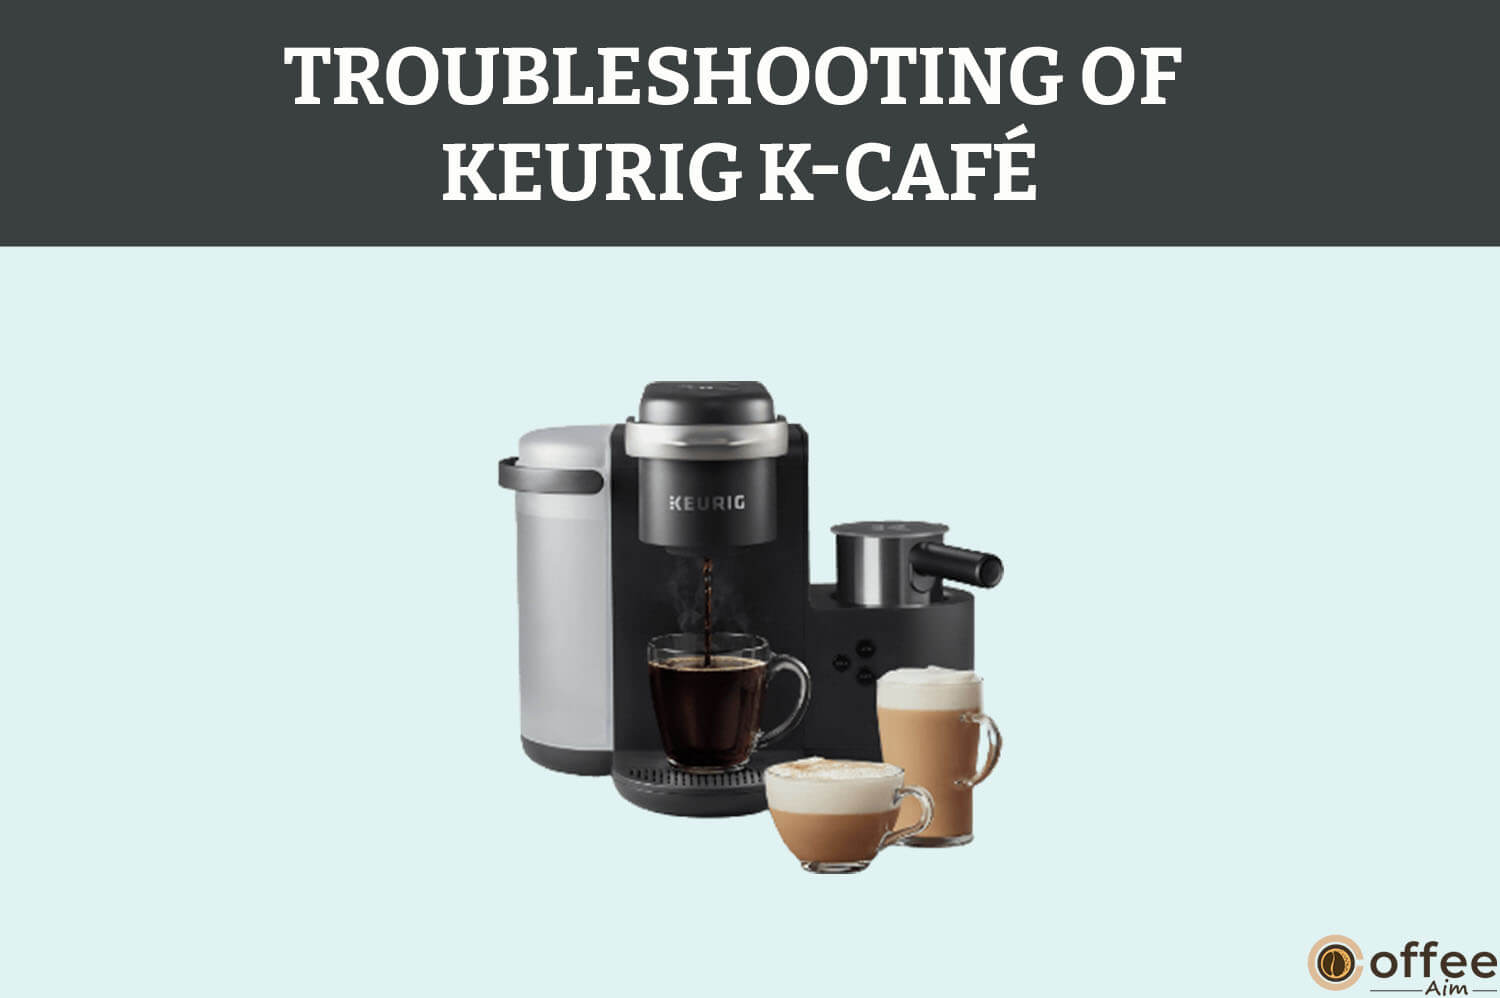 Featured image for the article "Troubleshooting of Keurig K-Café"